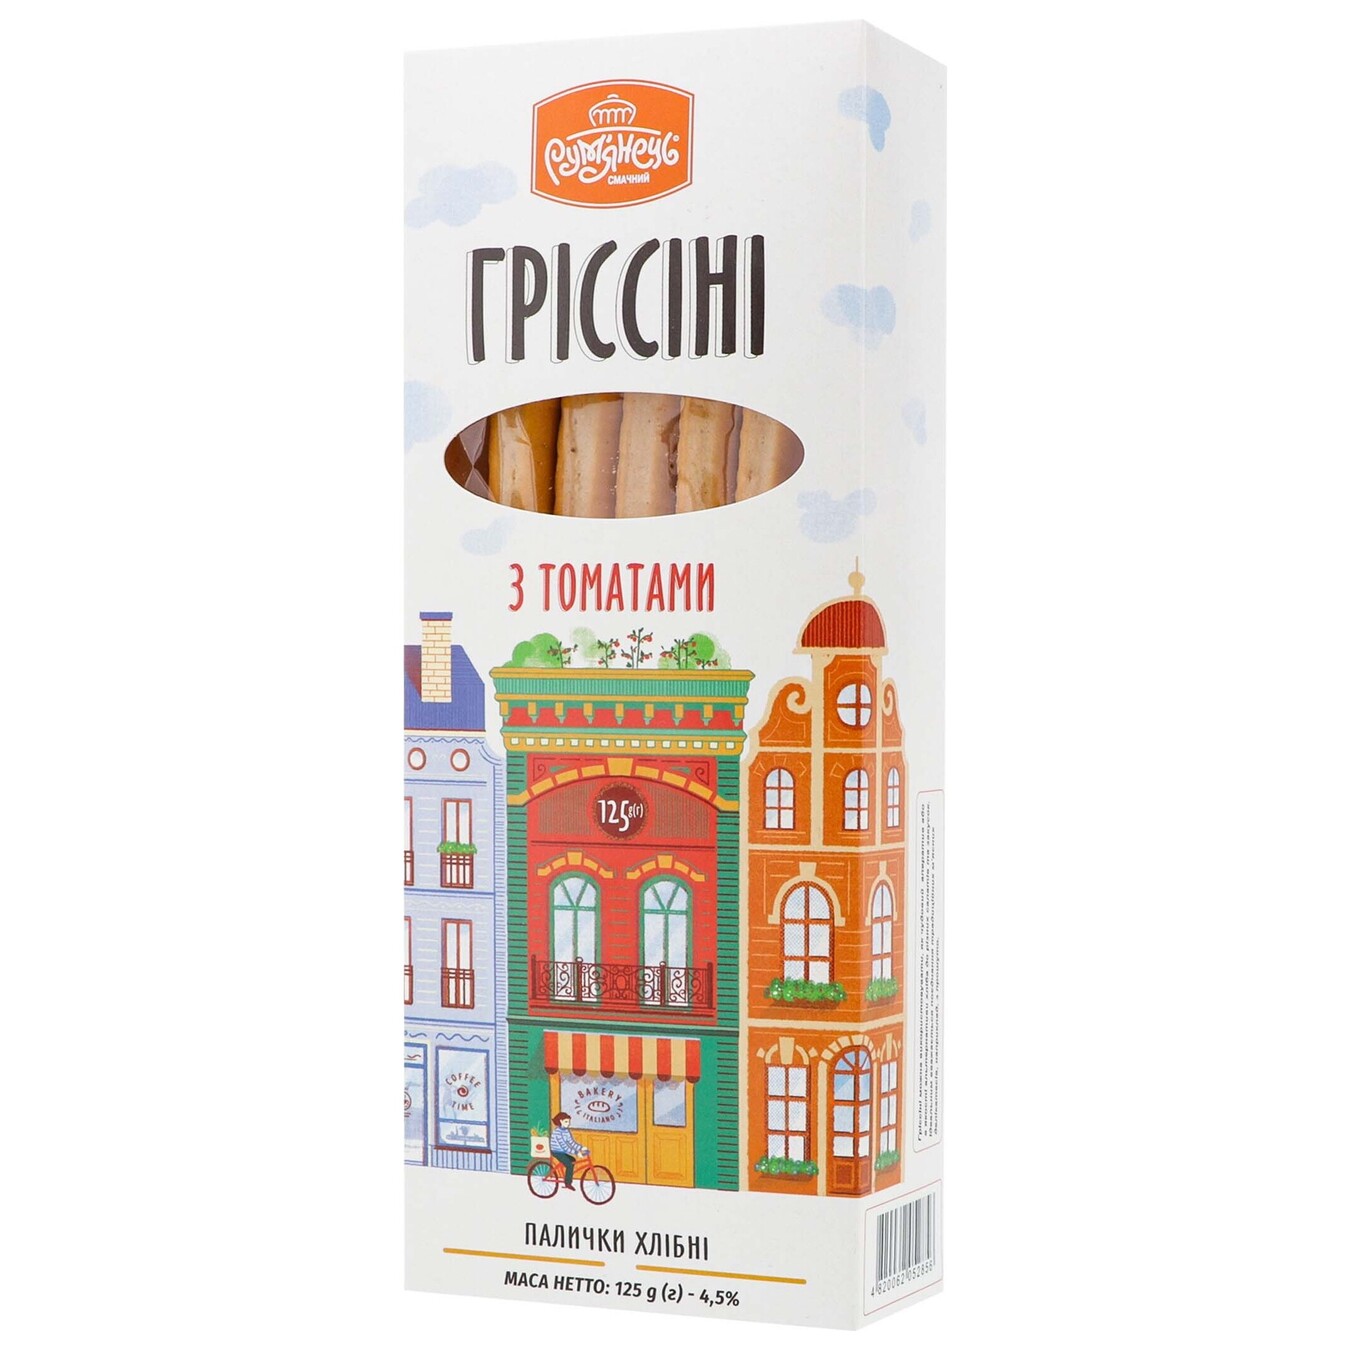 Breadsticks Blush Grissini with tomatoes 125g 2